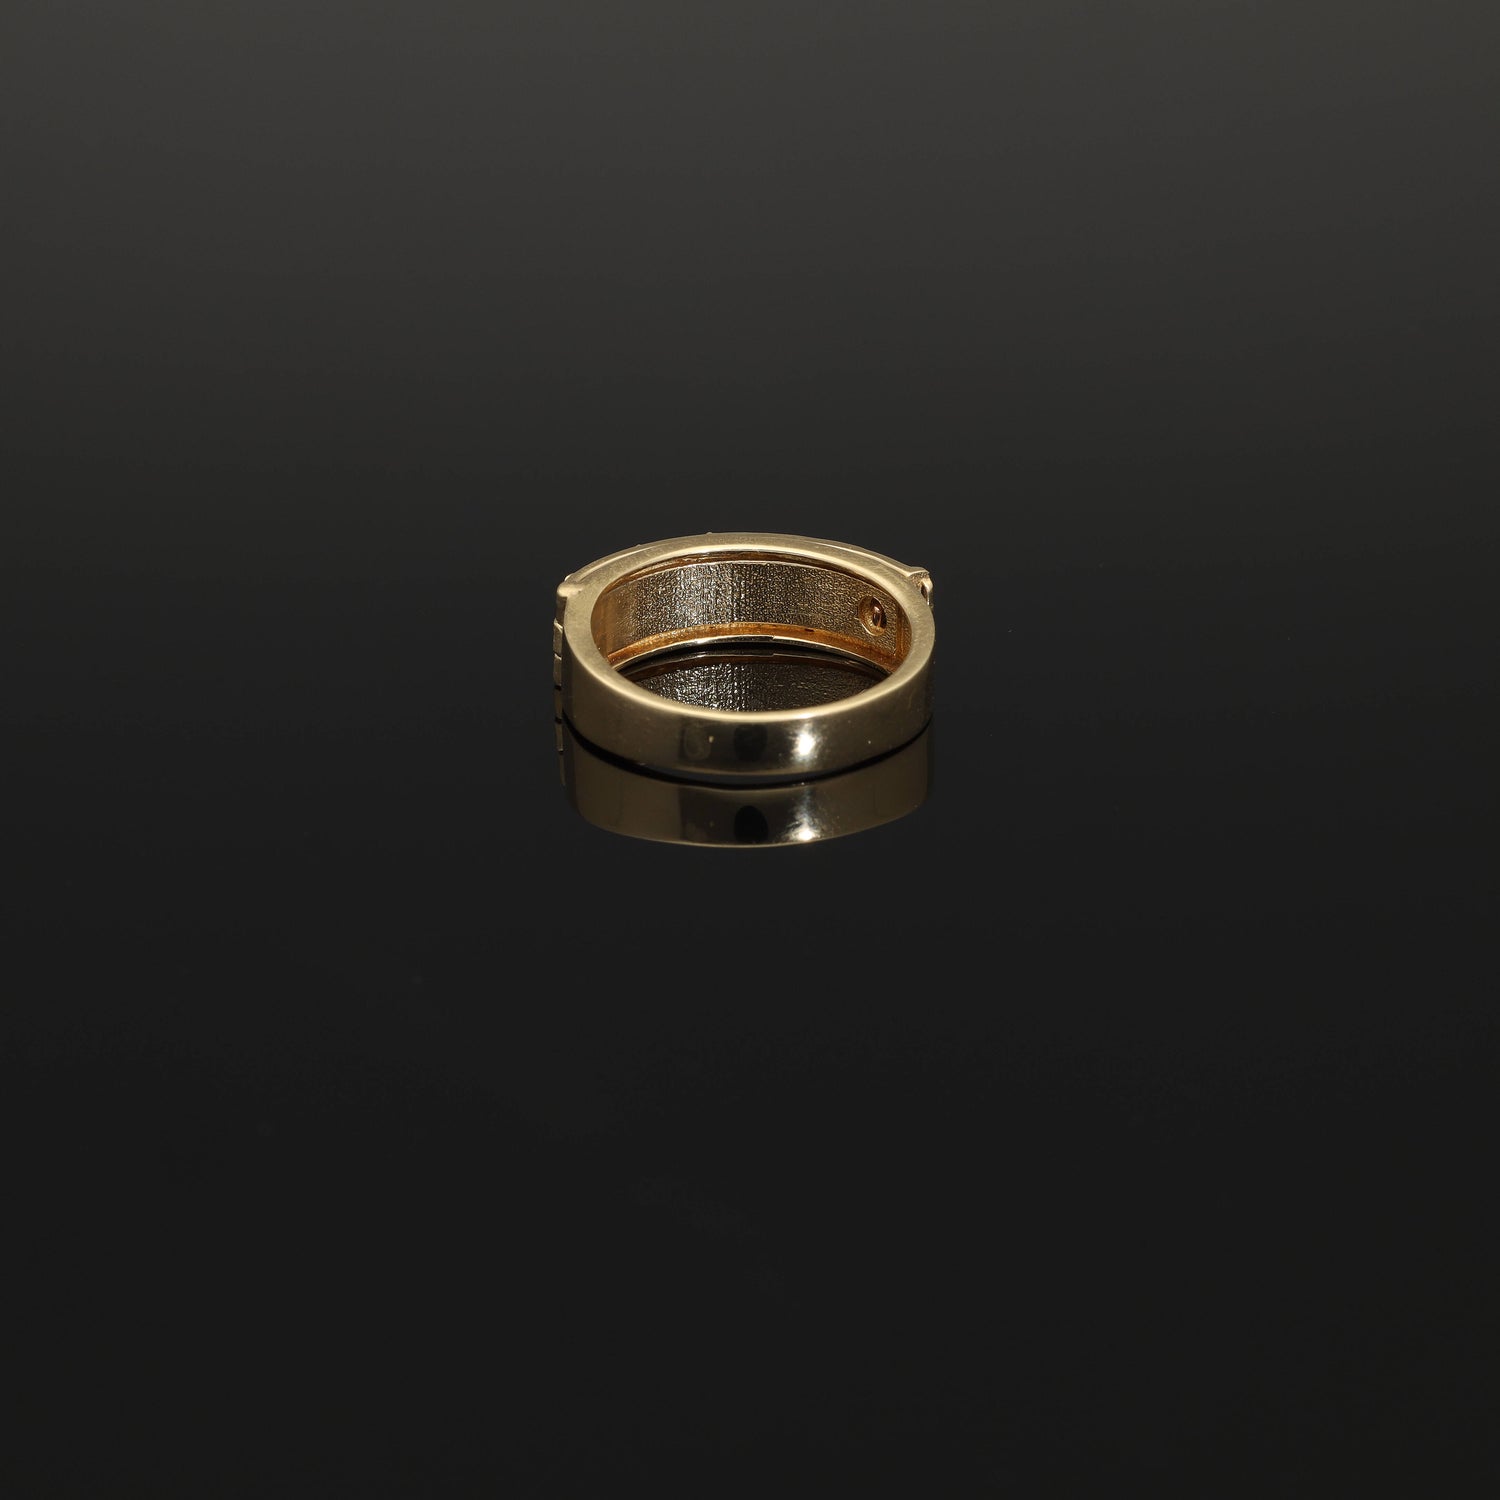 A unique unisex diamond secret compartment ring in solid 14k gold. This yellow gold so-called poison ring opens to a secret compartment which reads DARLING. A modern twist on Victorian era sentimental jewelry, this beautiful ring is produced on demand by our workshop.  The face of the ring has a celestial ornament depicting a star surrounded by foilate.